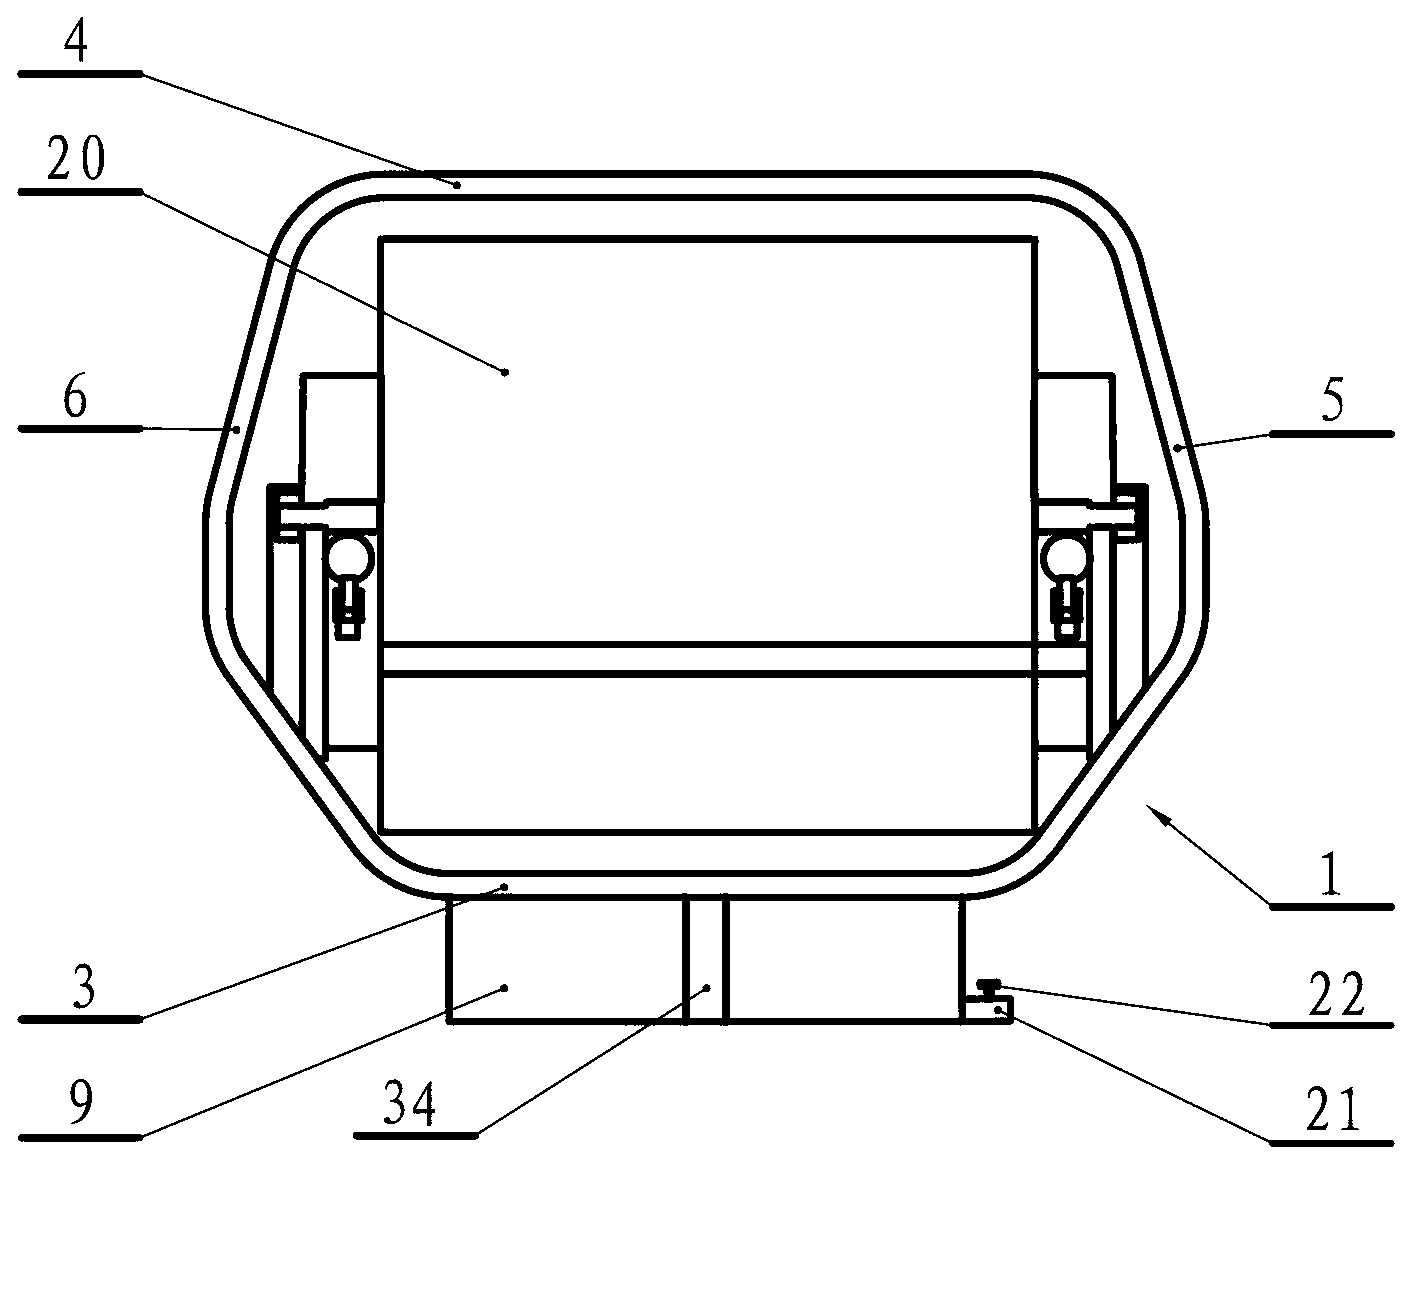 Compression type environmental sanitation compartment with liquid storage box and environmental sanitation vehicle with environmental sanitation compartment